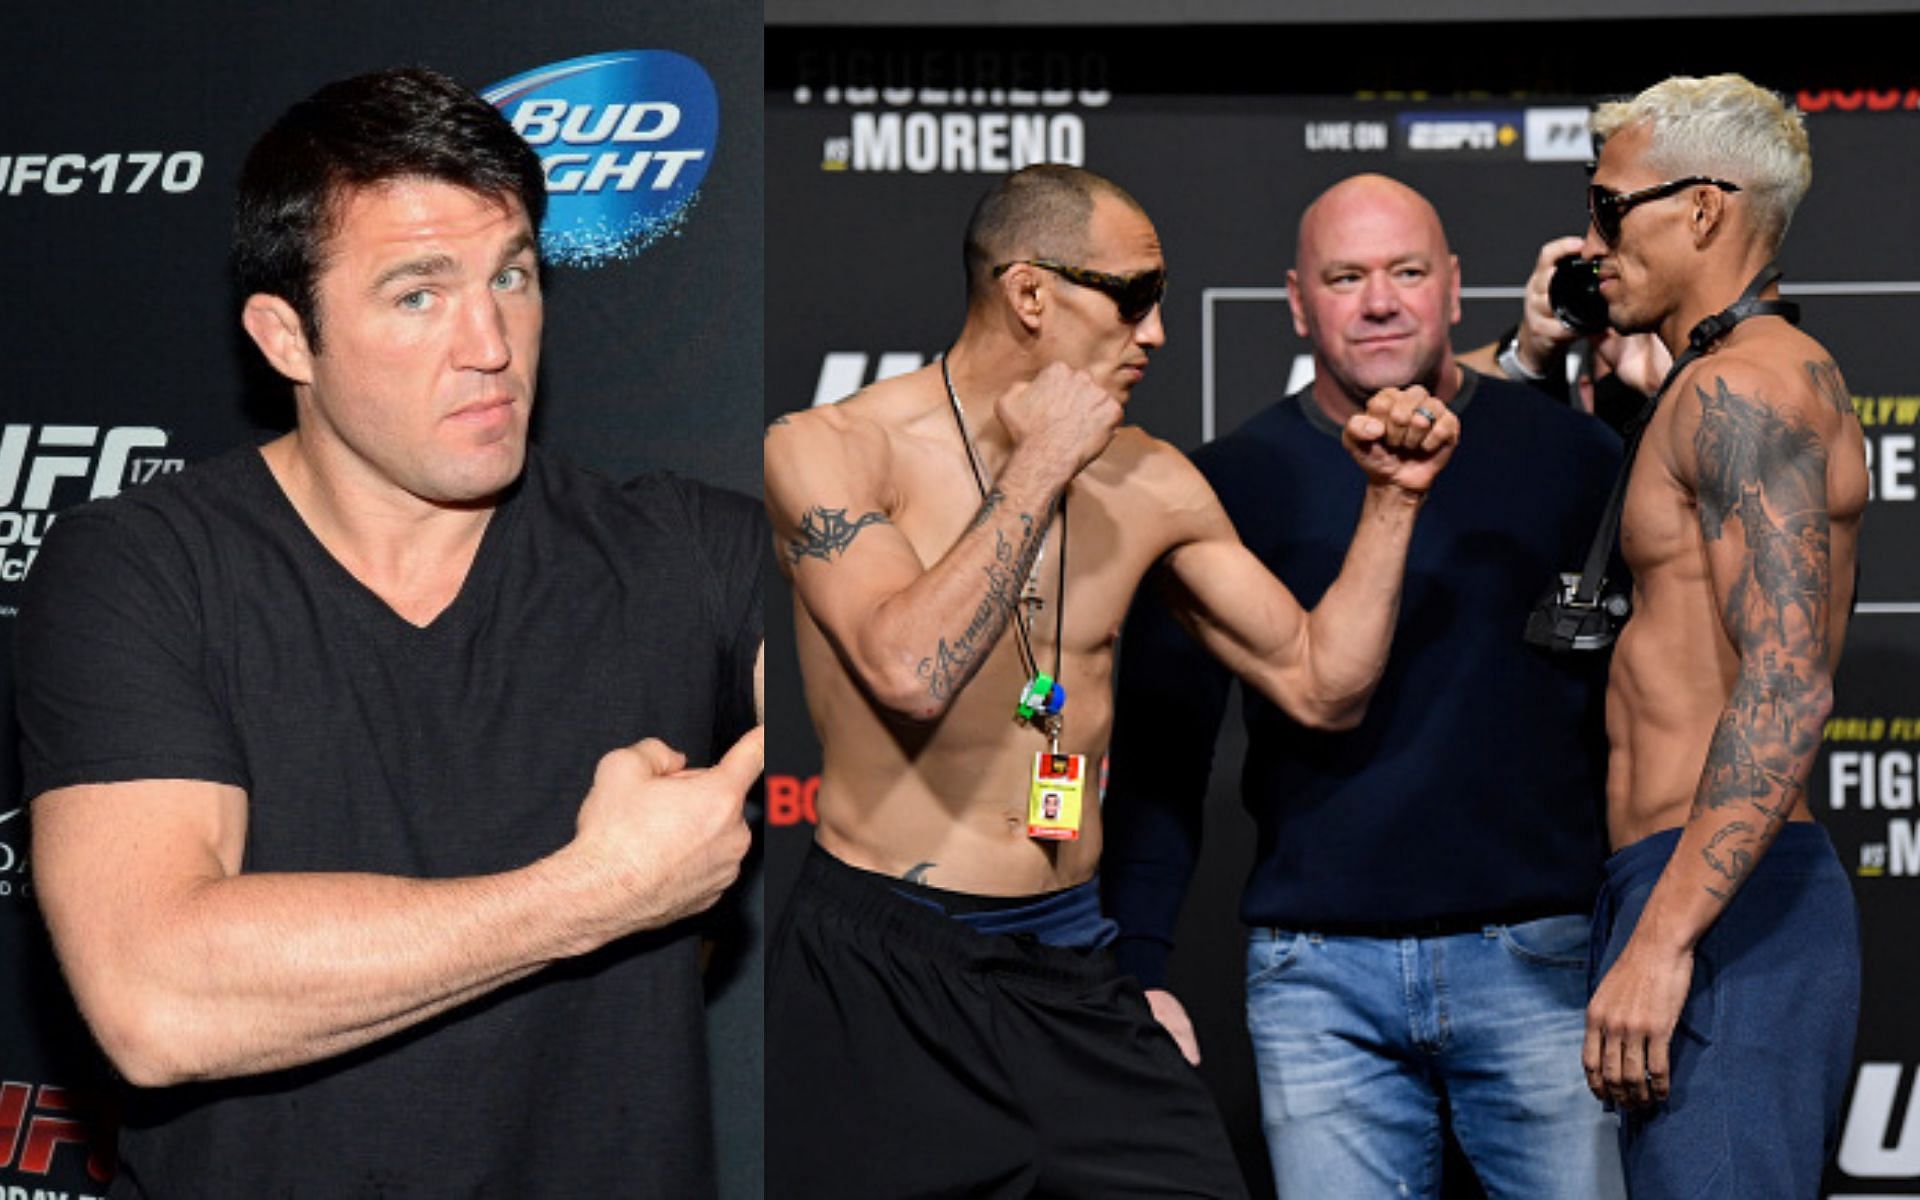 From left to right: Chael Sonnen, Tony Ferguson, and Charles Oliveira